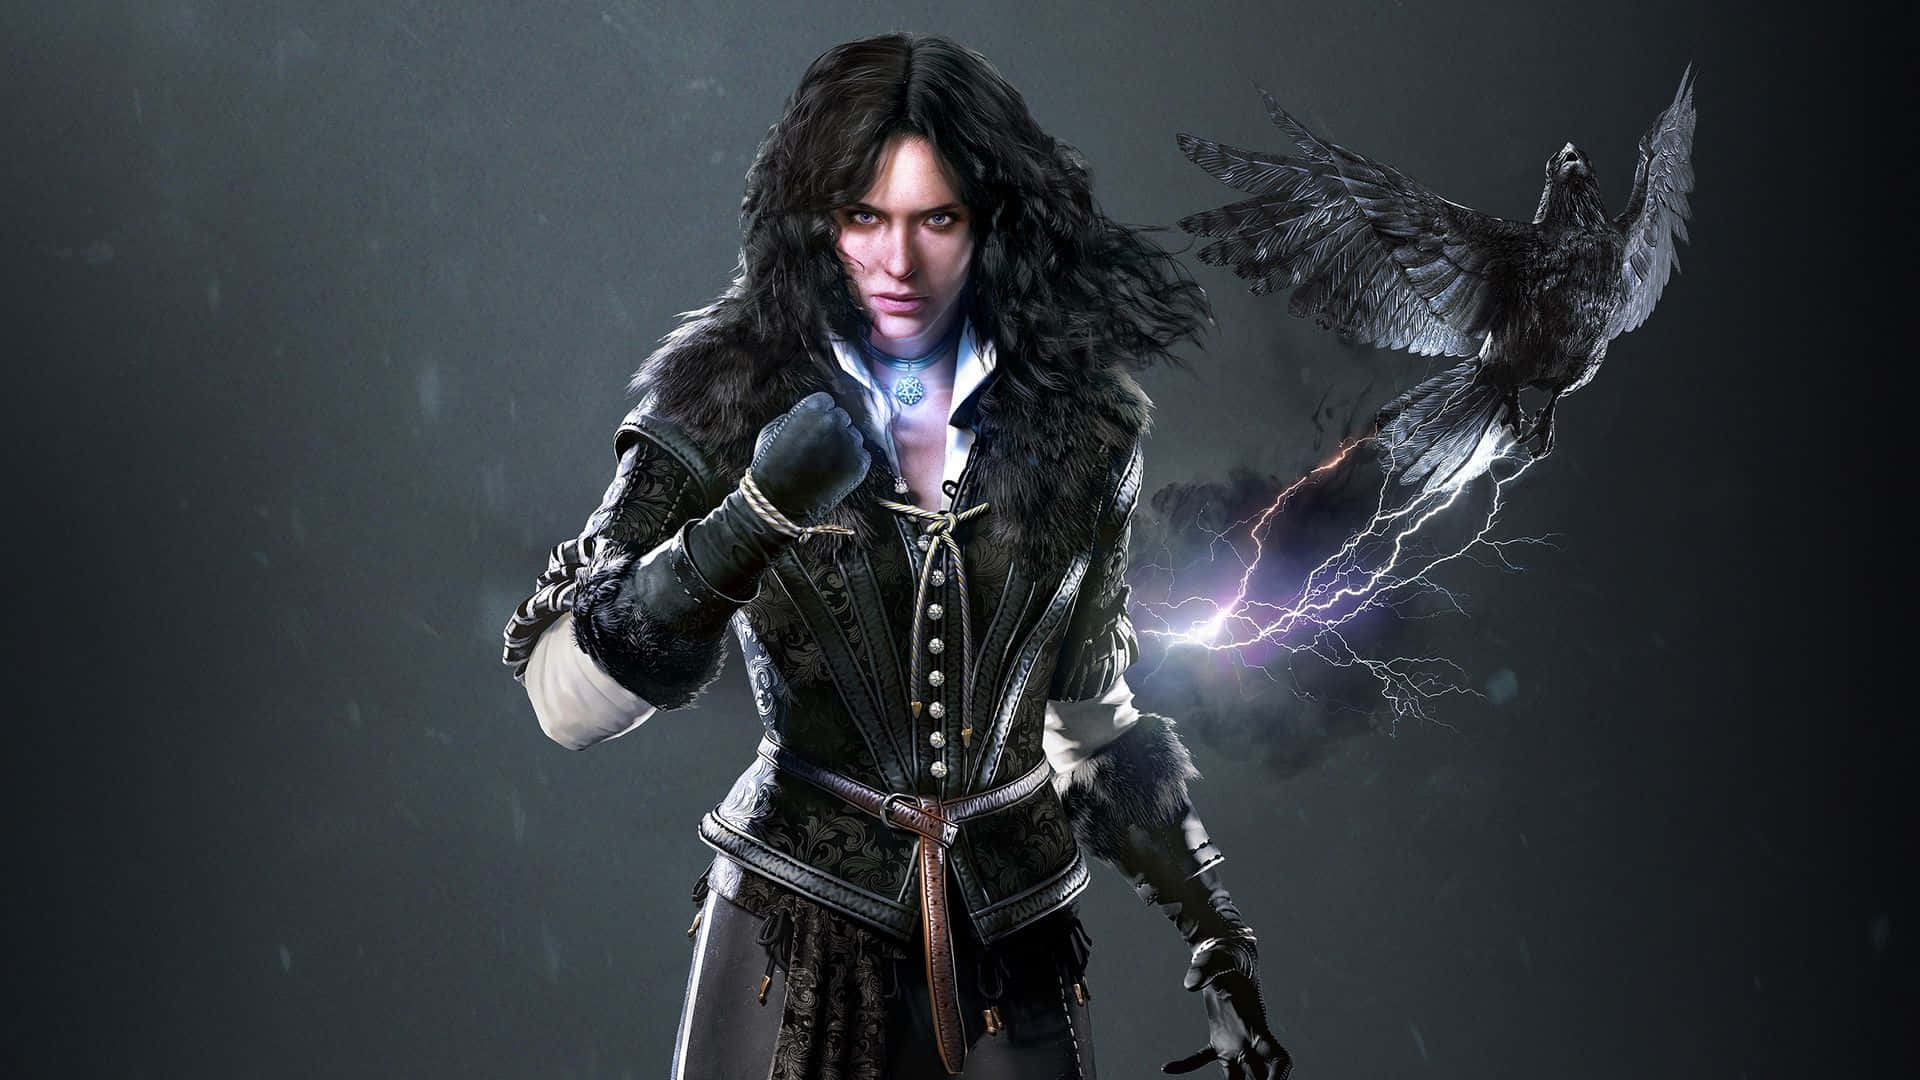 The Witcher 1920x1080 Yennefer Wallpaper